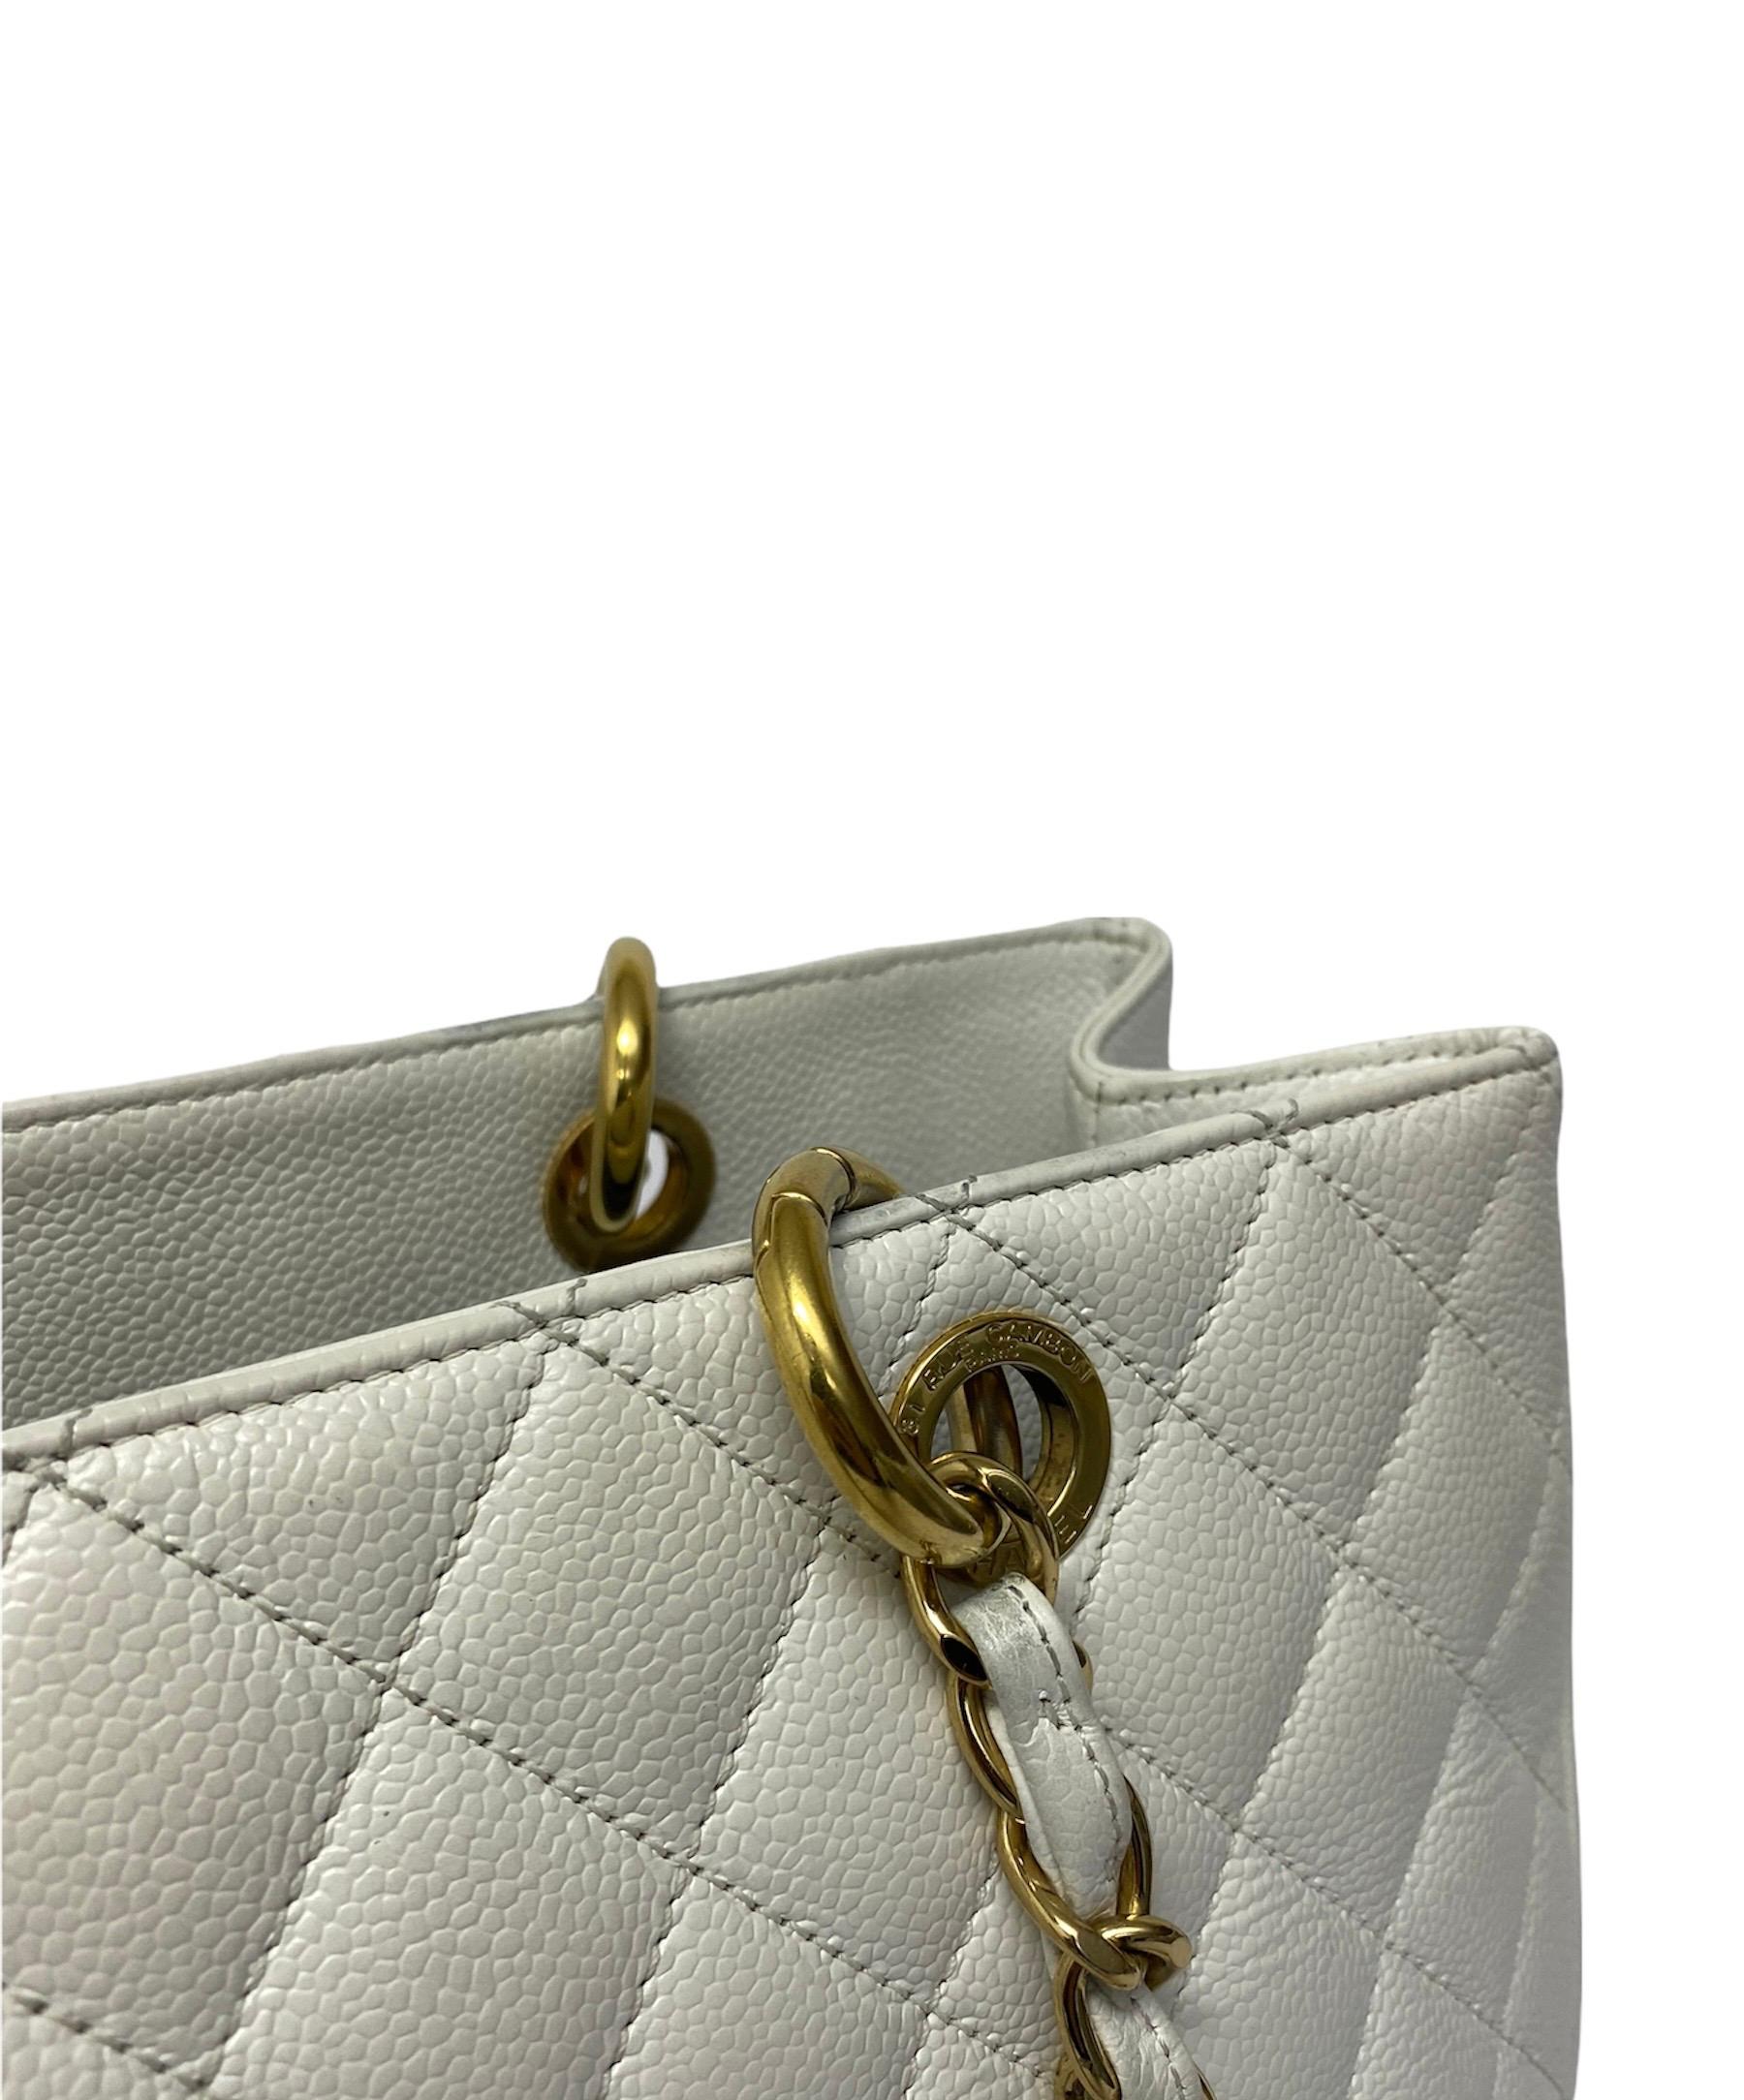 Women's 2011 Chanel White Leather GST Bag